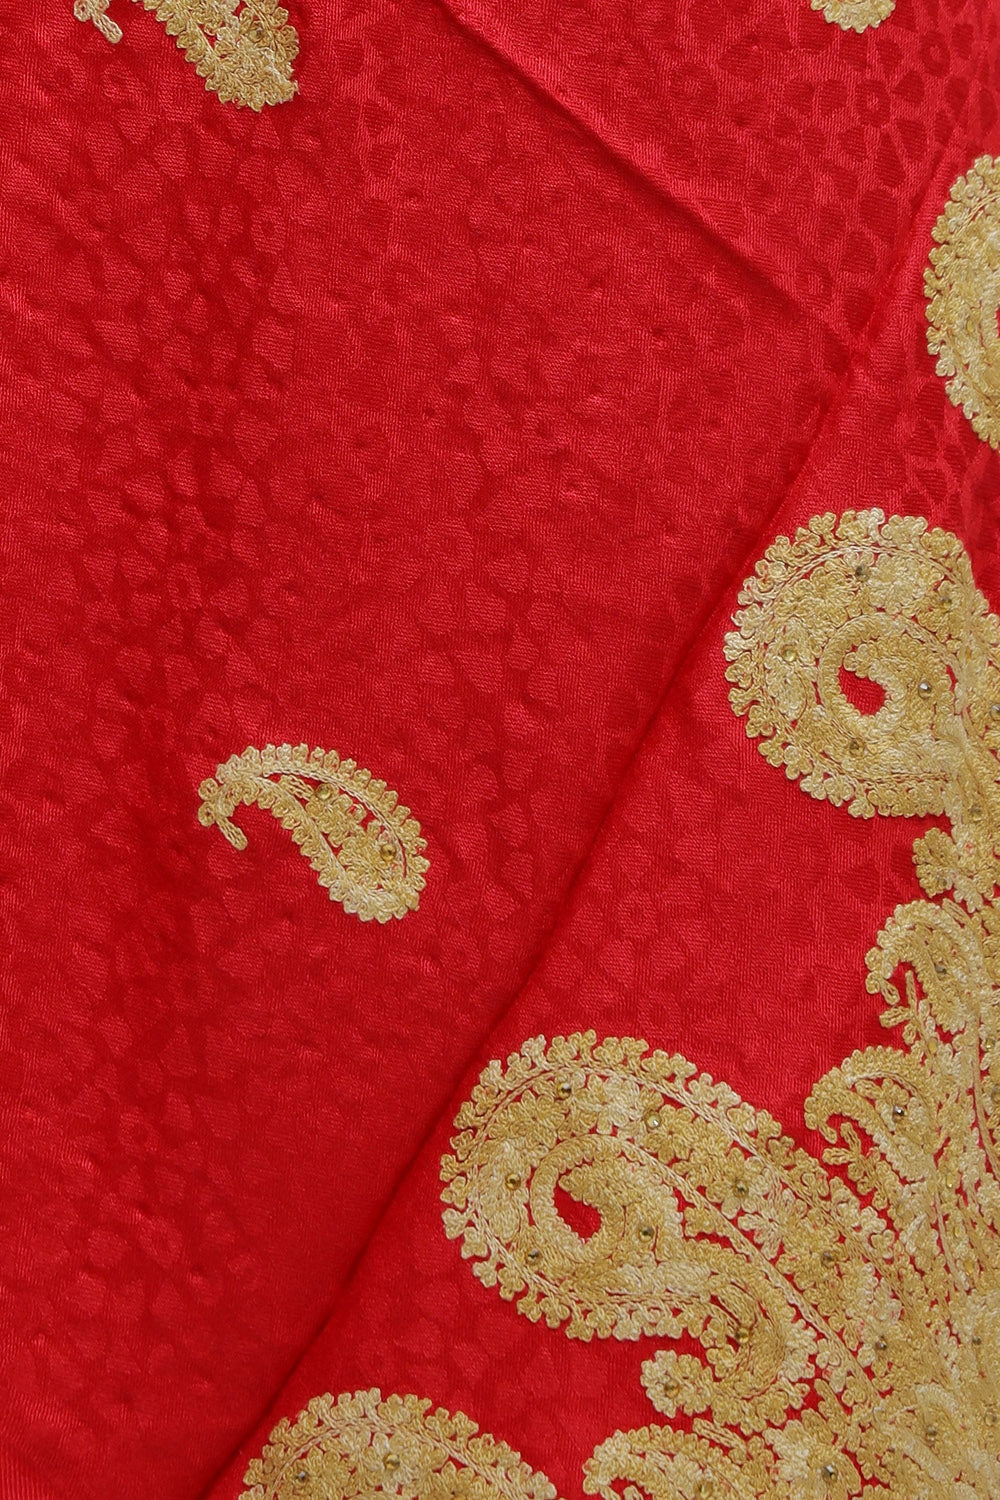 Ravishing Red Colour Stole Enriched With Aari Embroidery